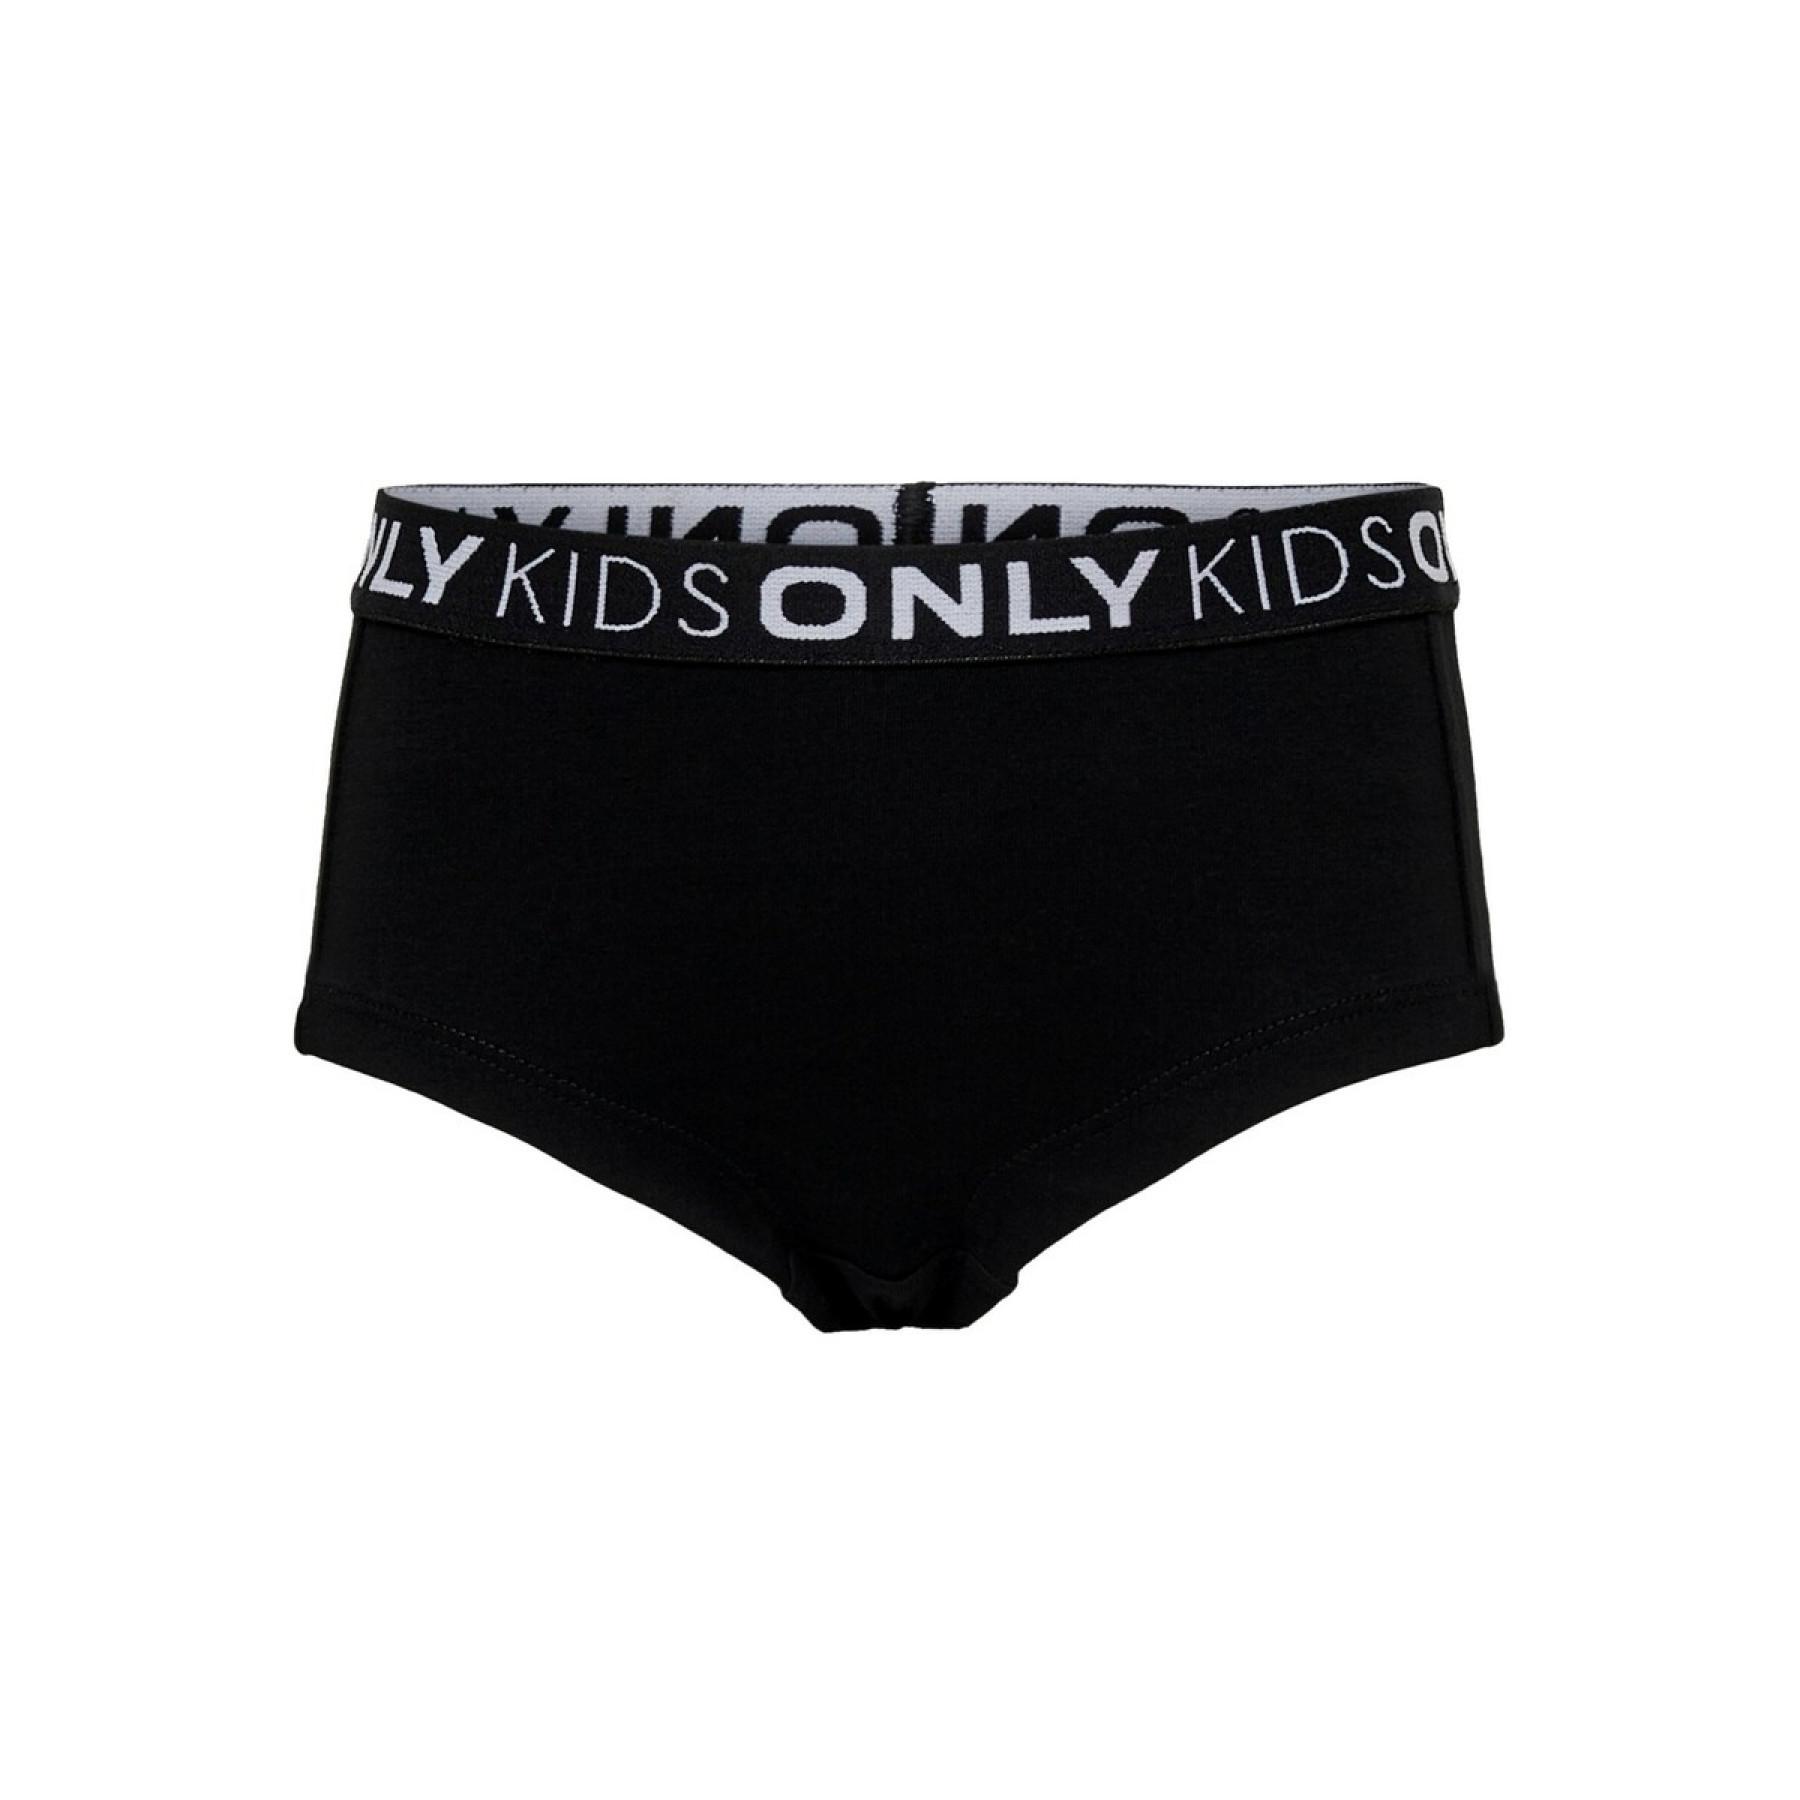 Lot de 2 boxers fille Only kids Love life hipster